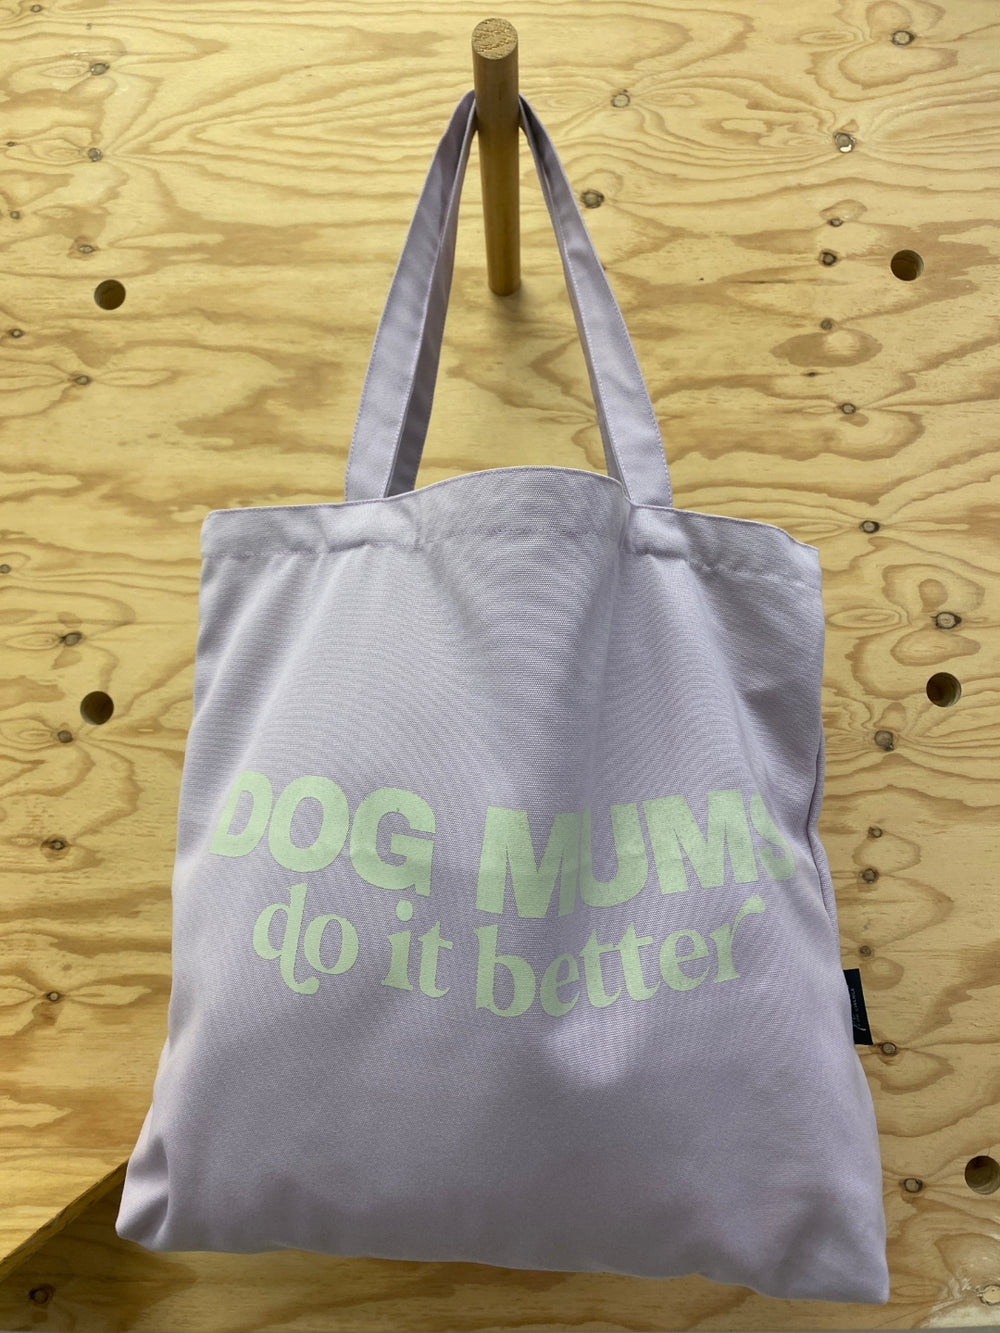 tote bag from paws for change